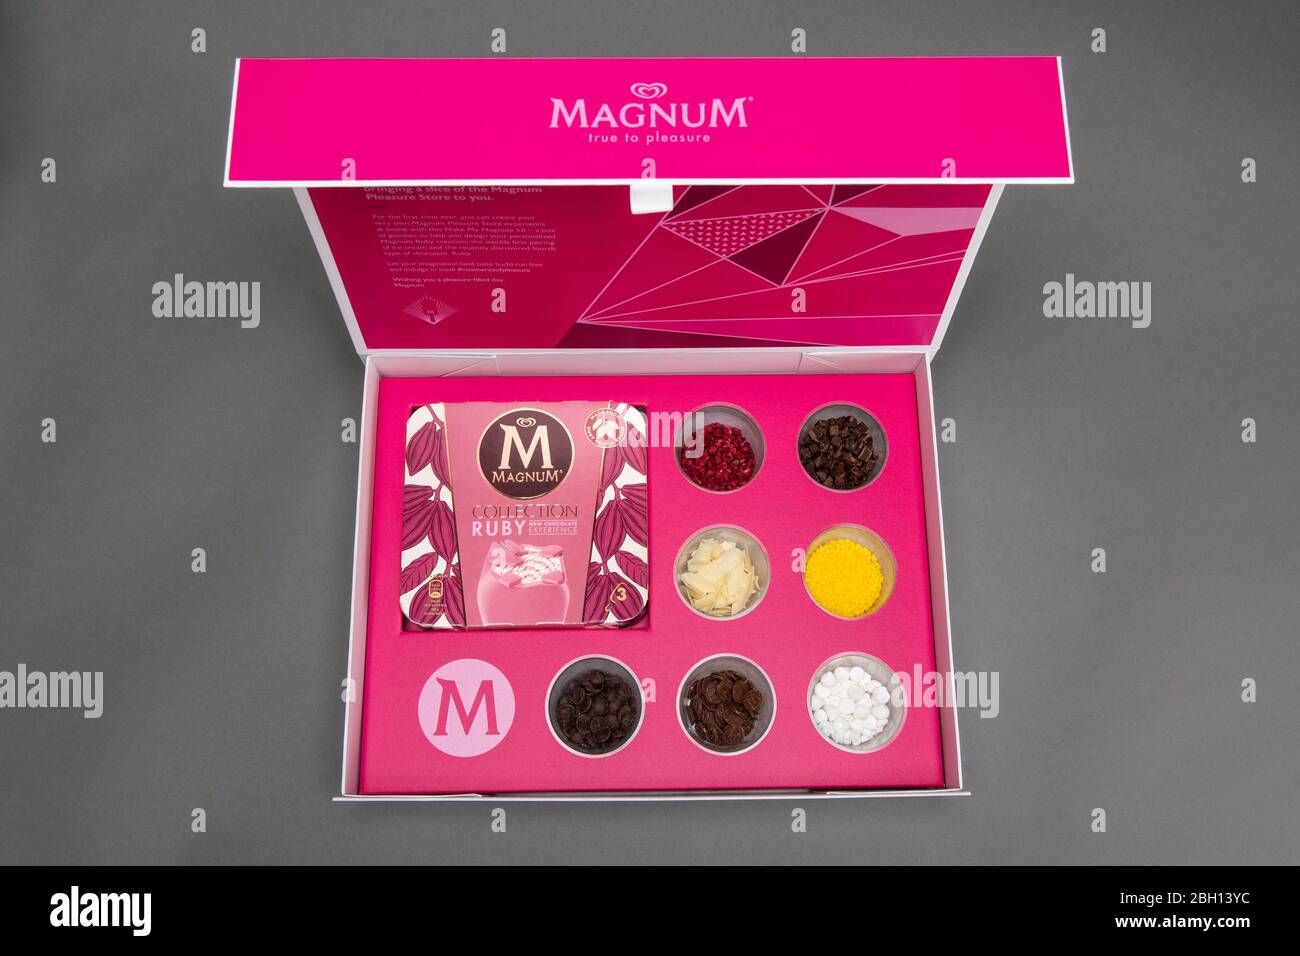 Ice cream brand Magnum has partnered with Deliveroo to create ???Make My Magnum kits???, which will be available from tomorrow, Friday April 24th. Stock Photo